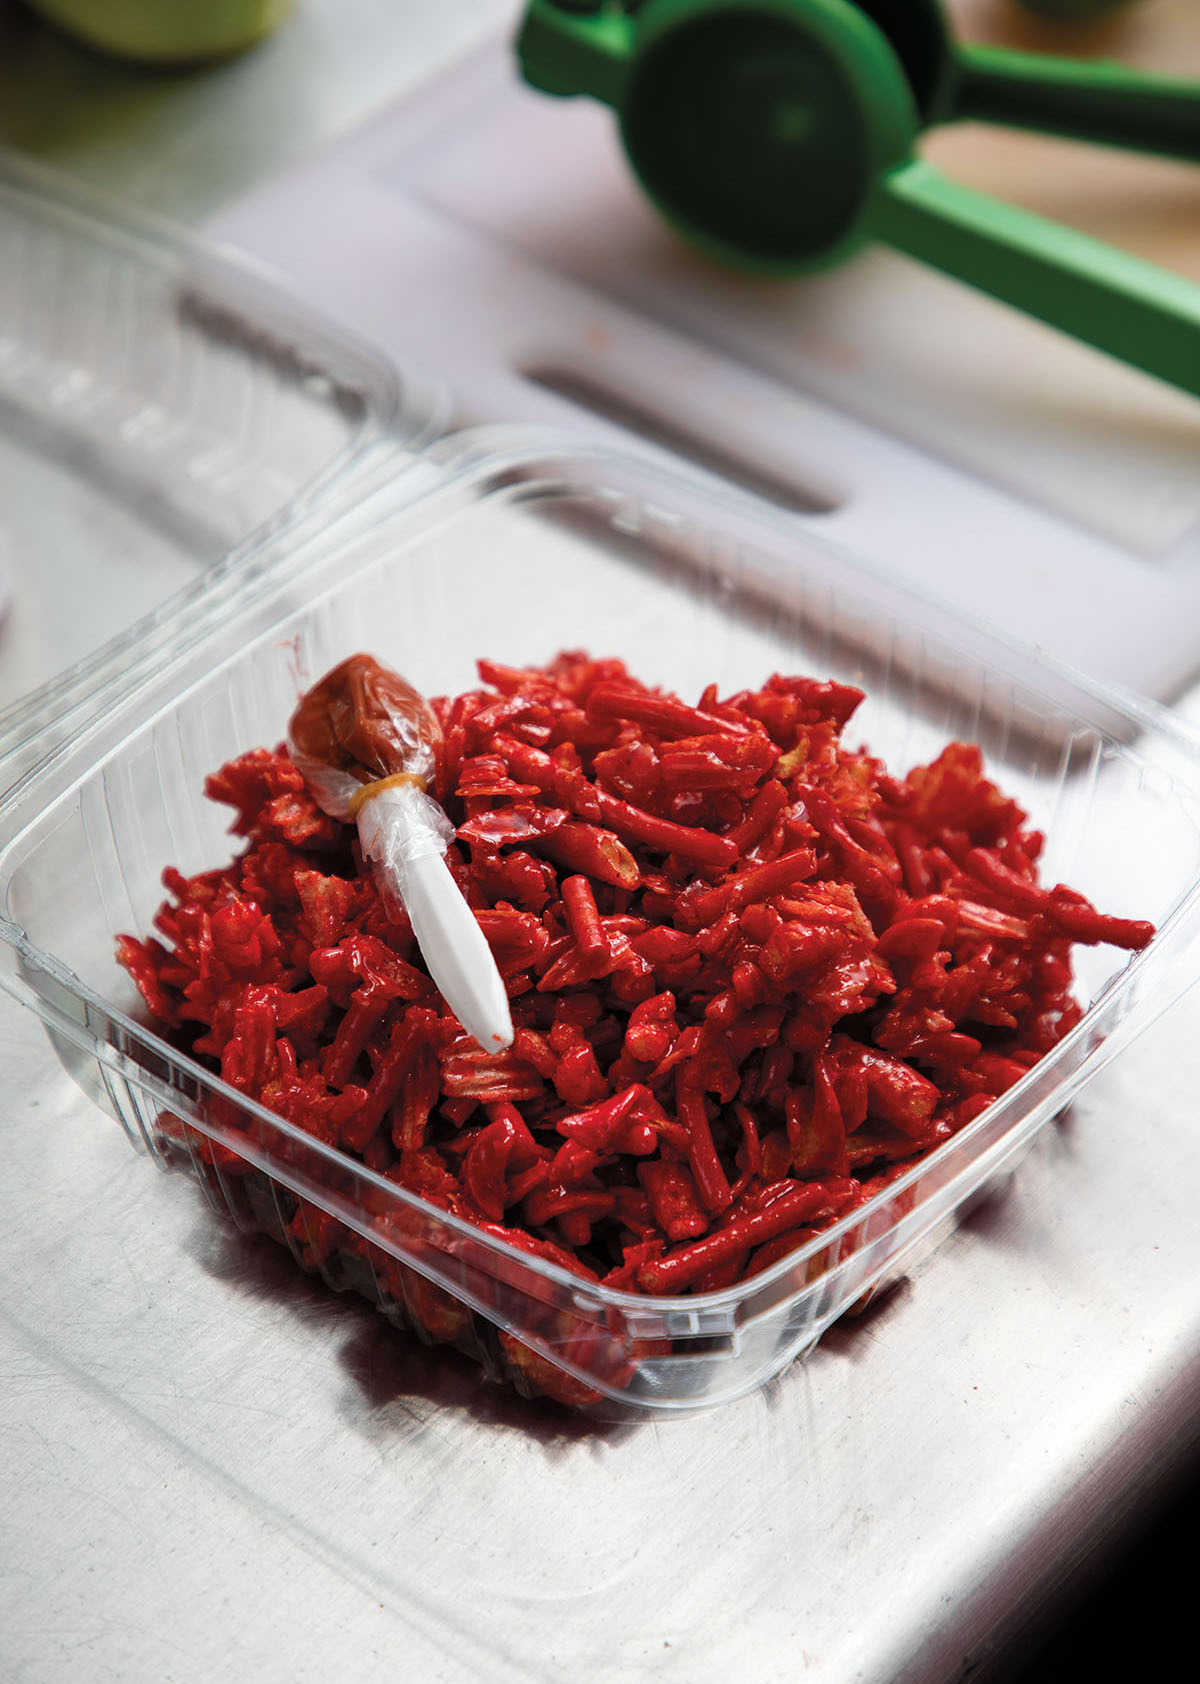 A container of bright red candies with a small bag of spicy seasoning